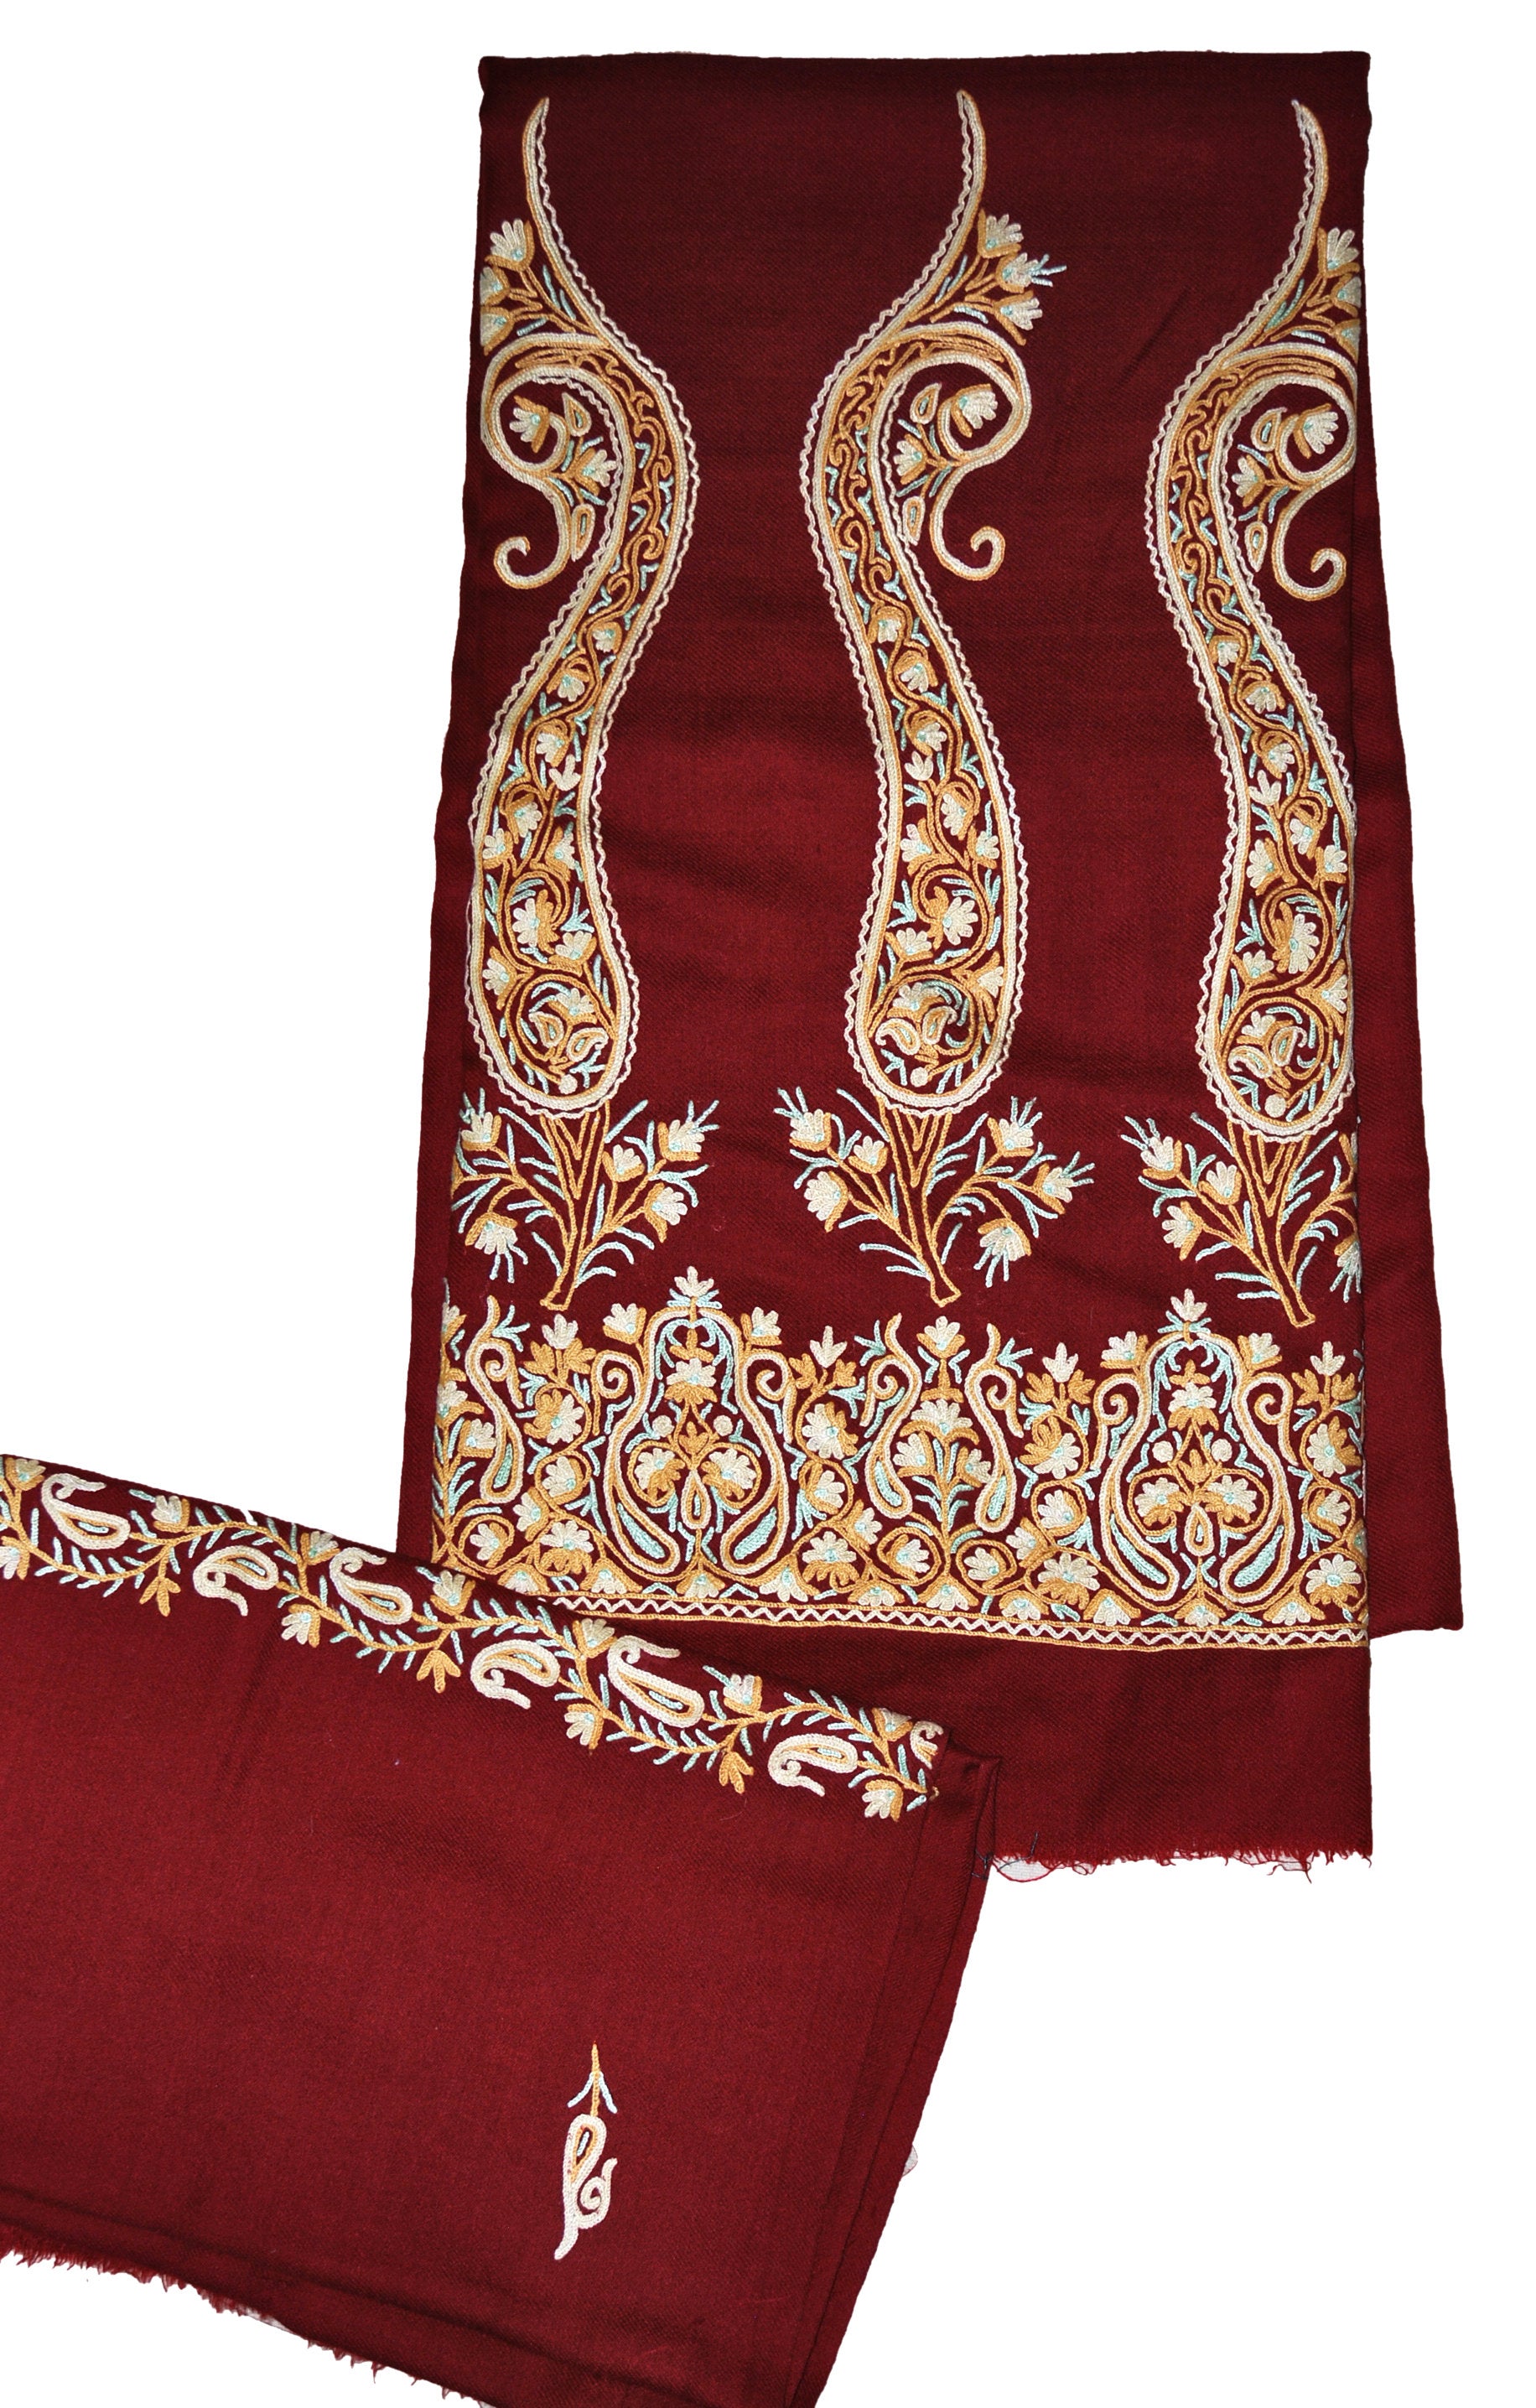 Woolen Salwar Kameez Suit Unstitched Fabric and Shawl Maroon, Multicolor Embroidery #FS-433